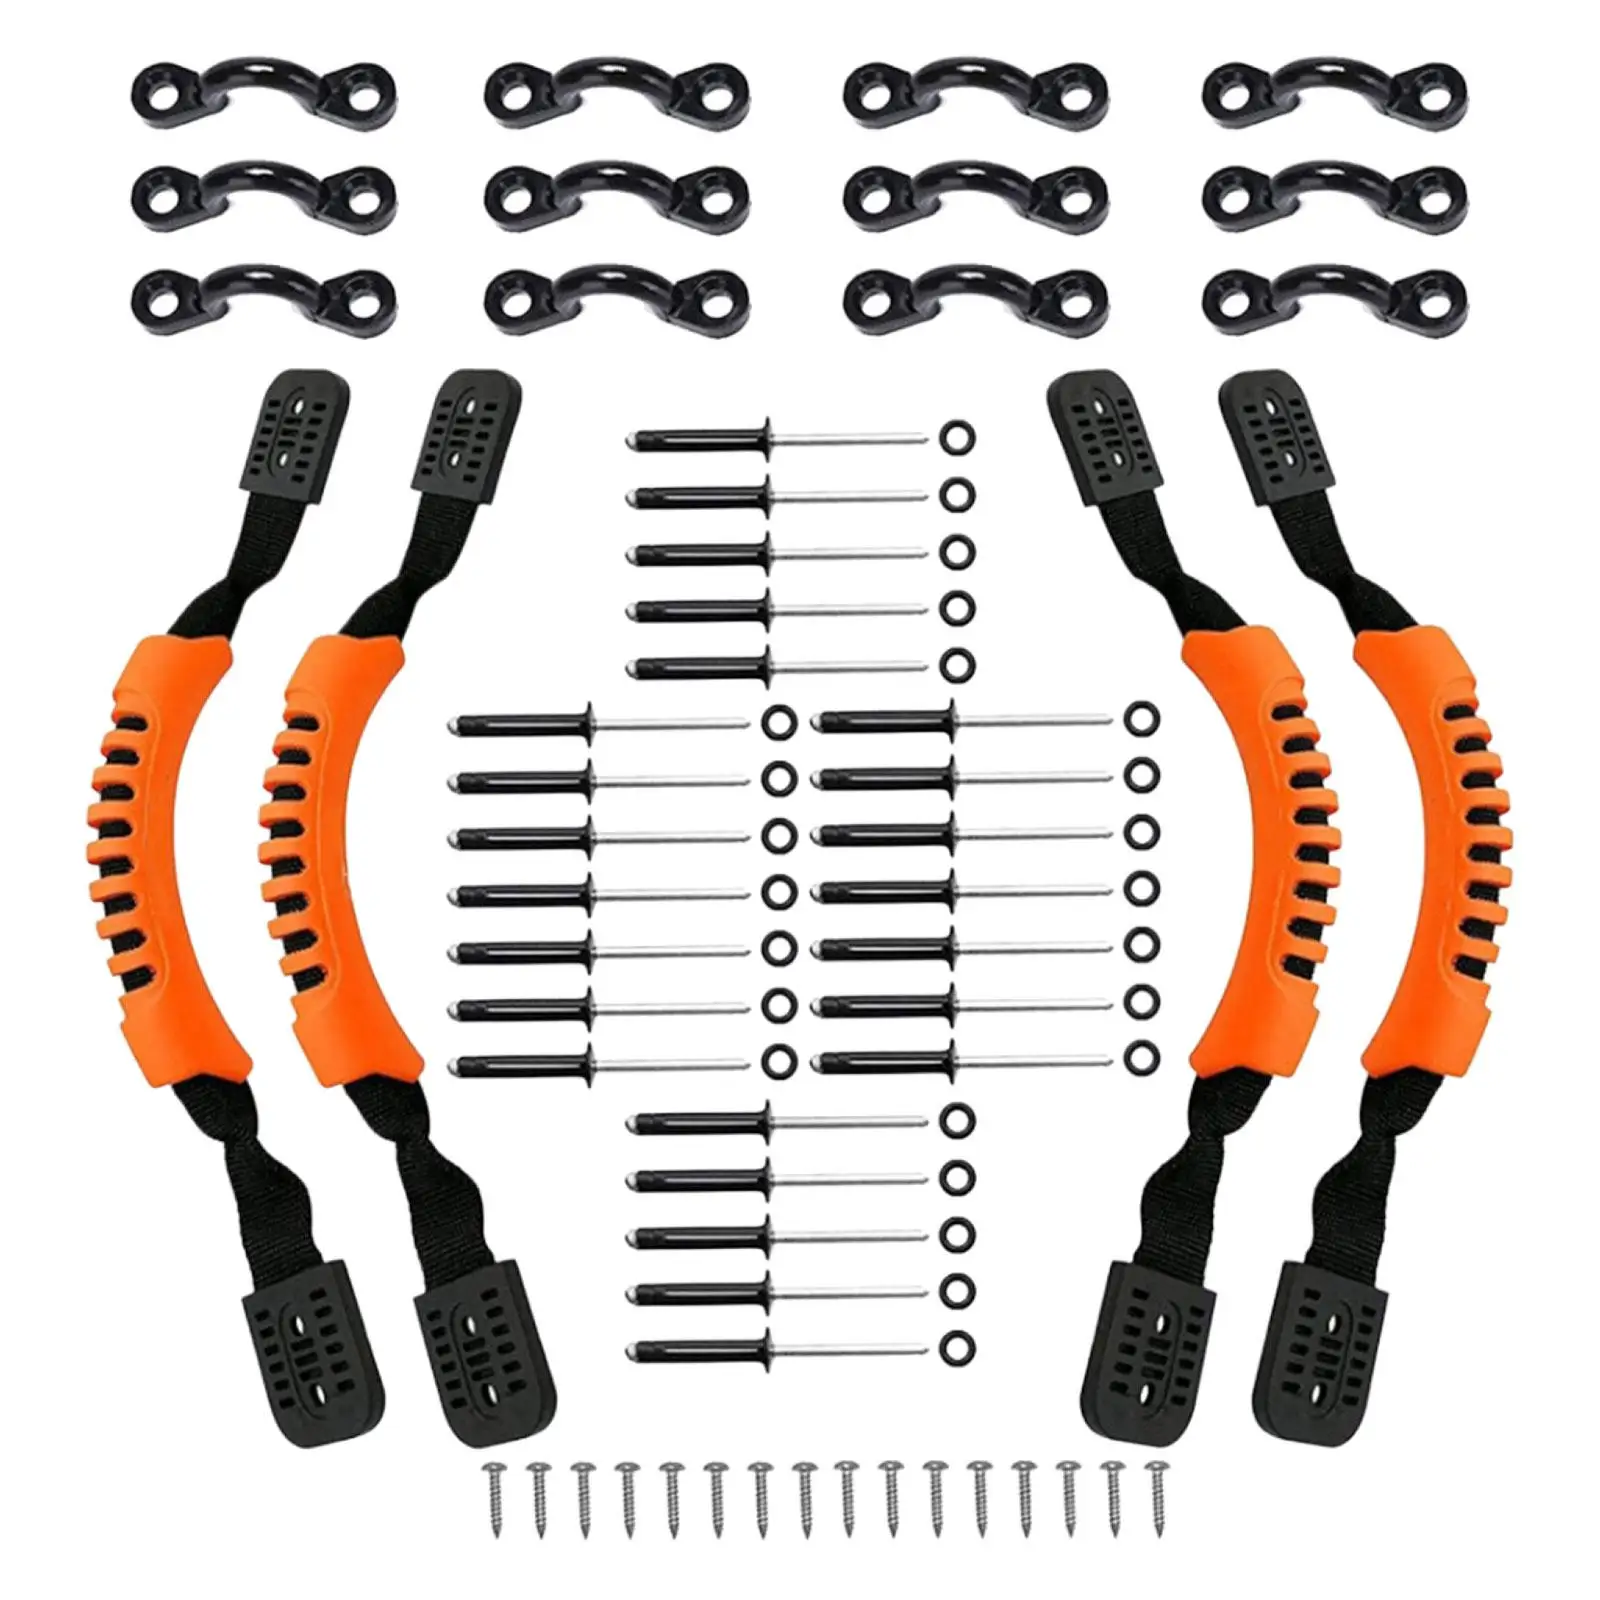 Kayak Handles with Screws Durable Kayak Carry Replacement Handles Side Mount Carry Handles for Canoe Outdoor Kayak Luggage Parts